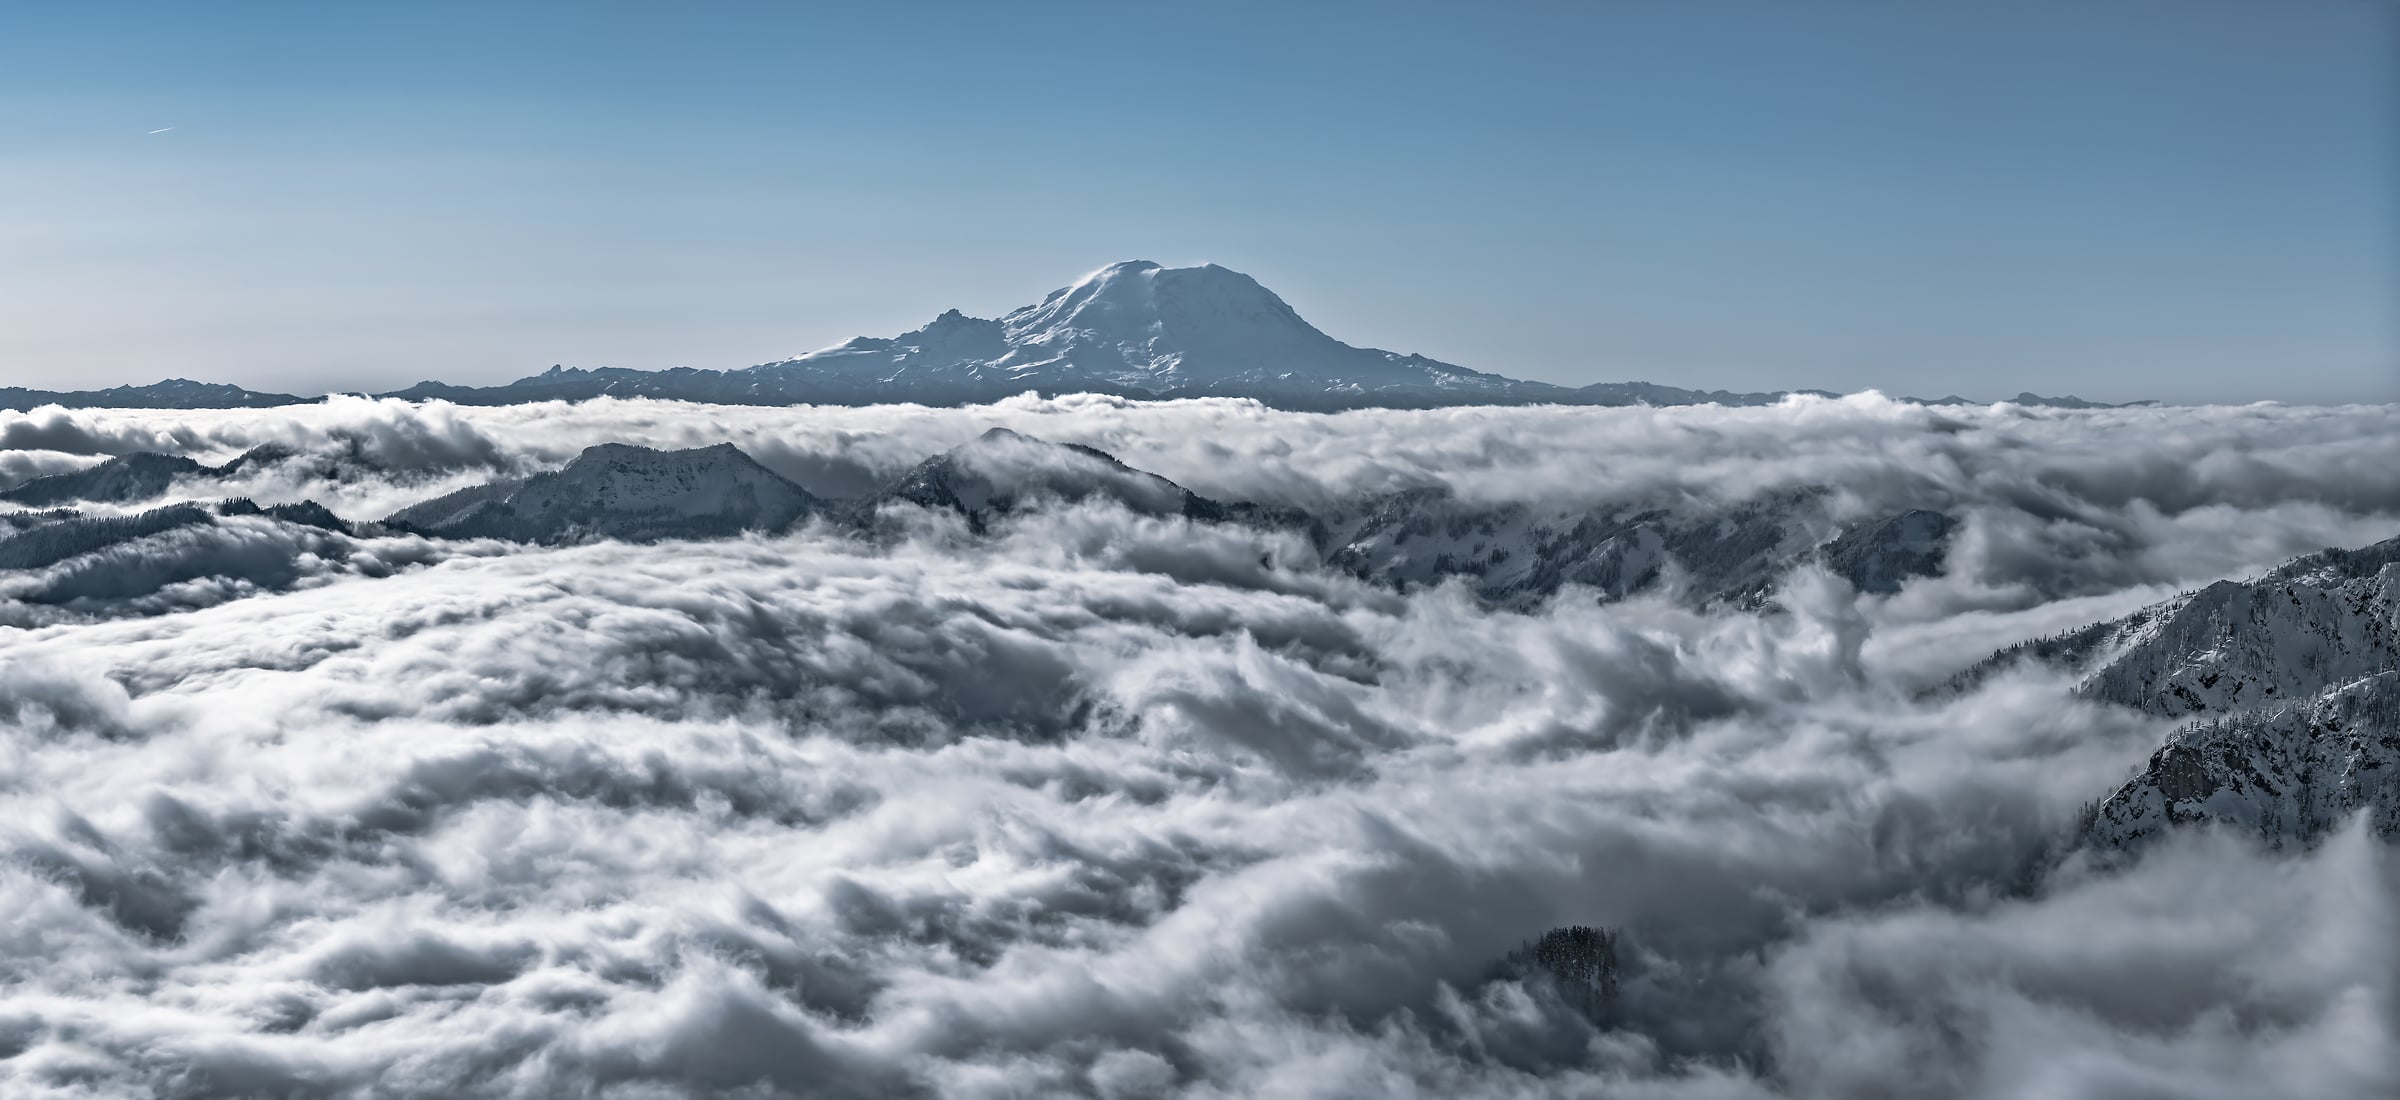 169 megapixels! A very high resolution, large-format VAST photo print of Mount Rainier and the Cascade Mountains among clouds; fine art landscape photo created by Scott Rinckenberger from Snoqualmie Mountain in Washington, USA